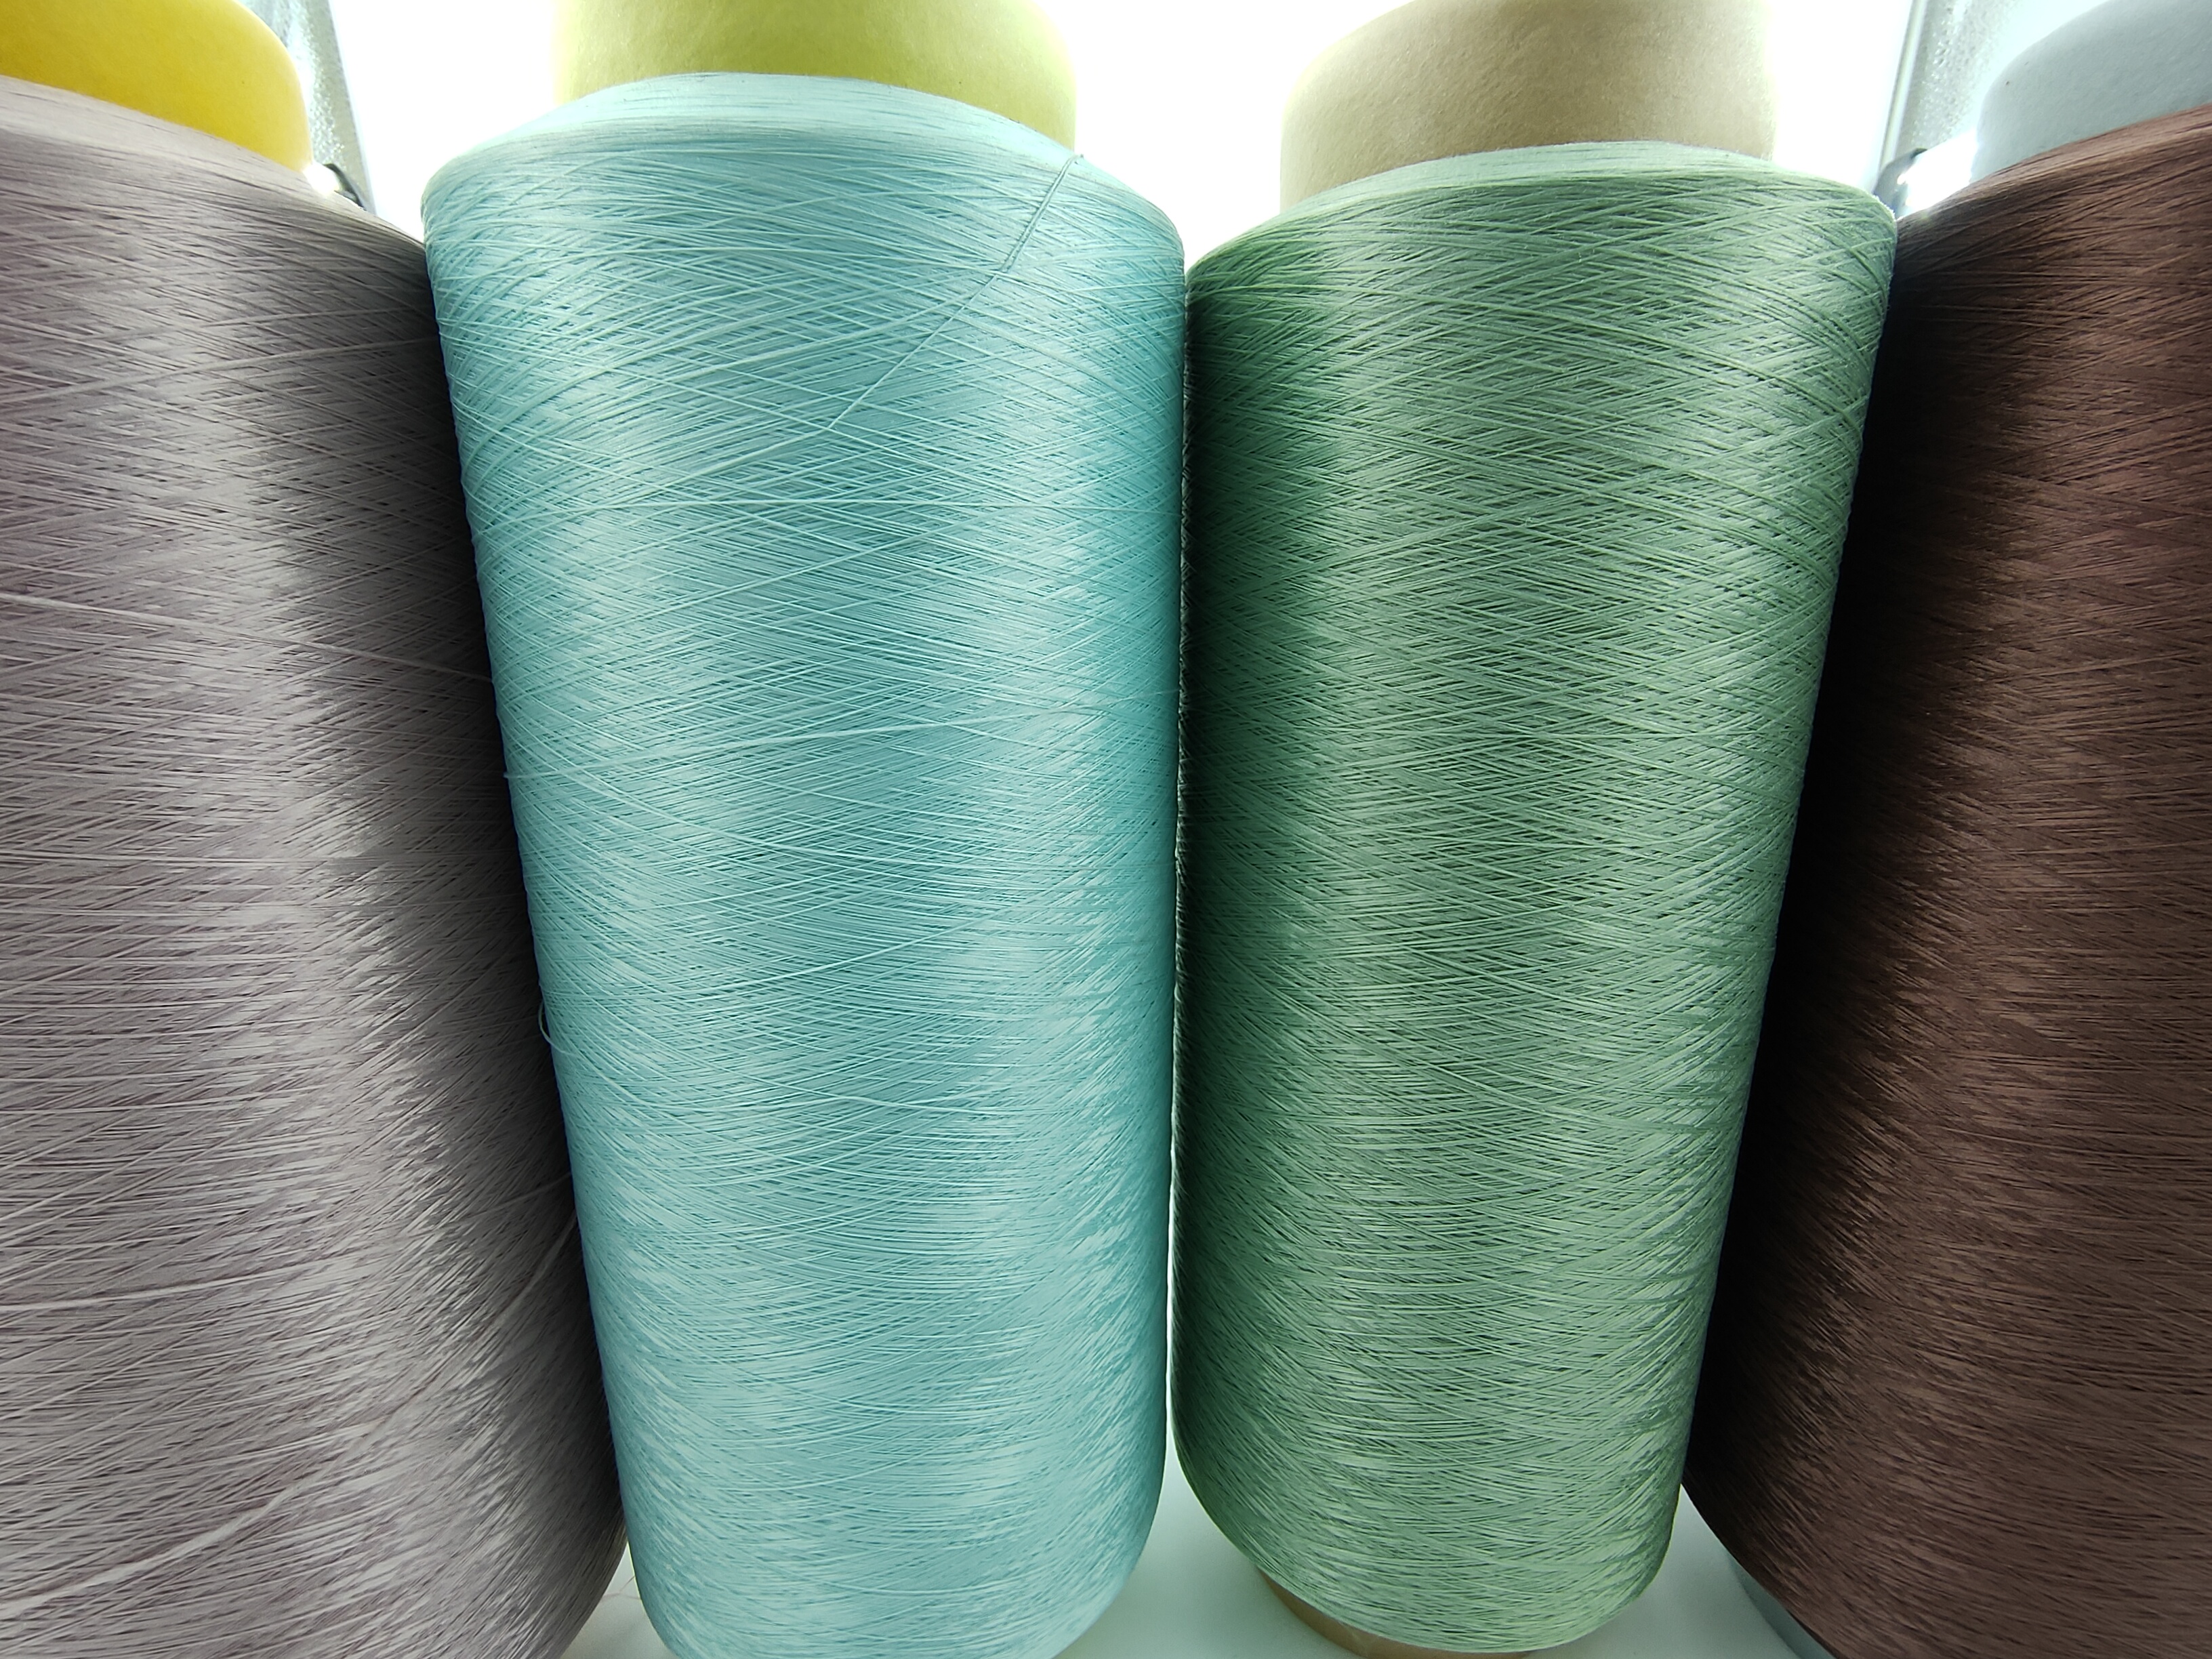 Polyester filament: negative growth in exports in the first half of the year, expected to pick up in the second half